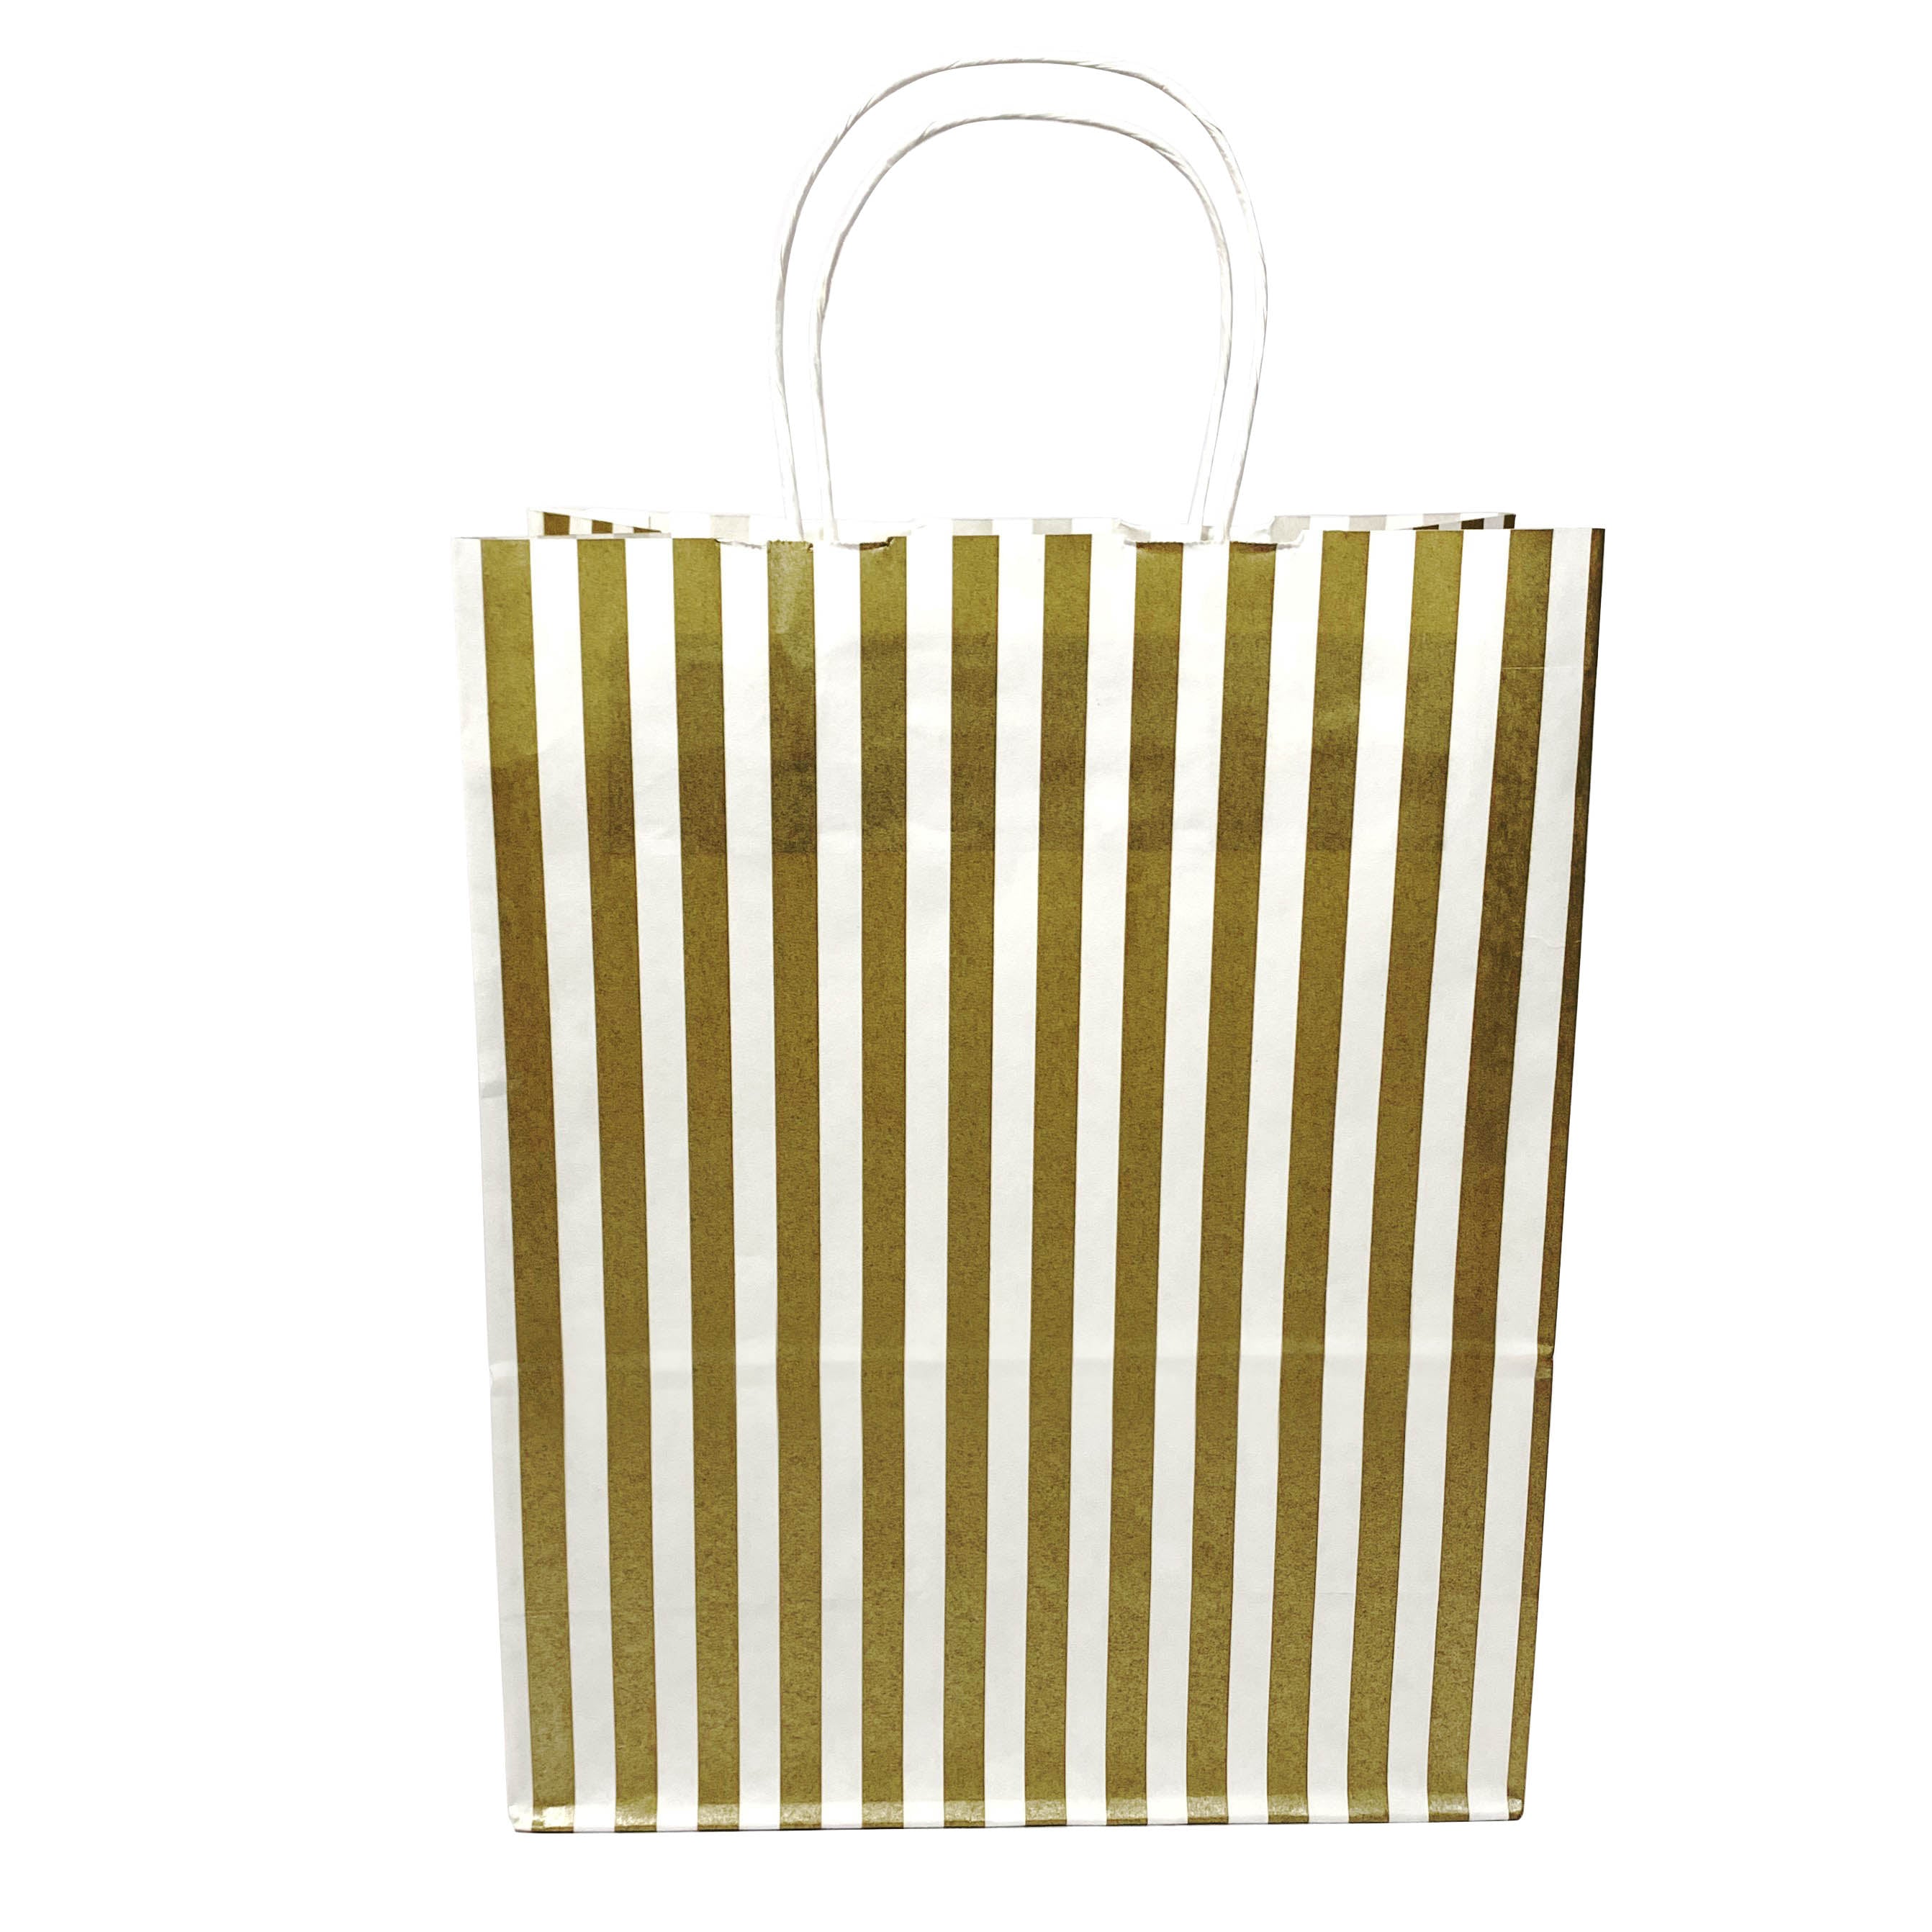 10 x 5 x 12H“ ORANGE Colored Paper Bag with Twisted Handles